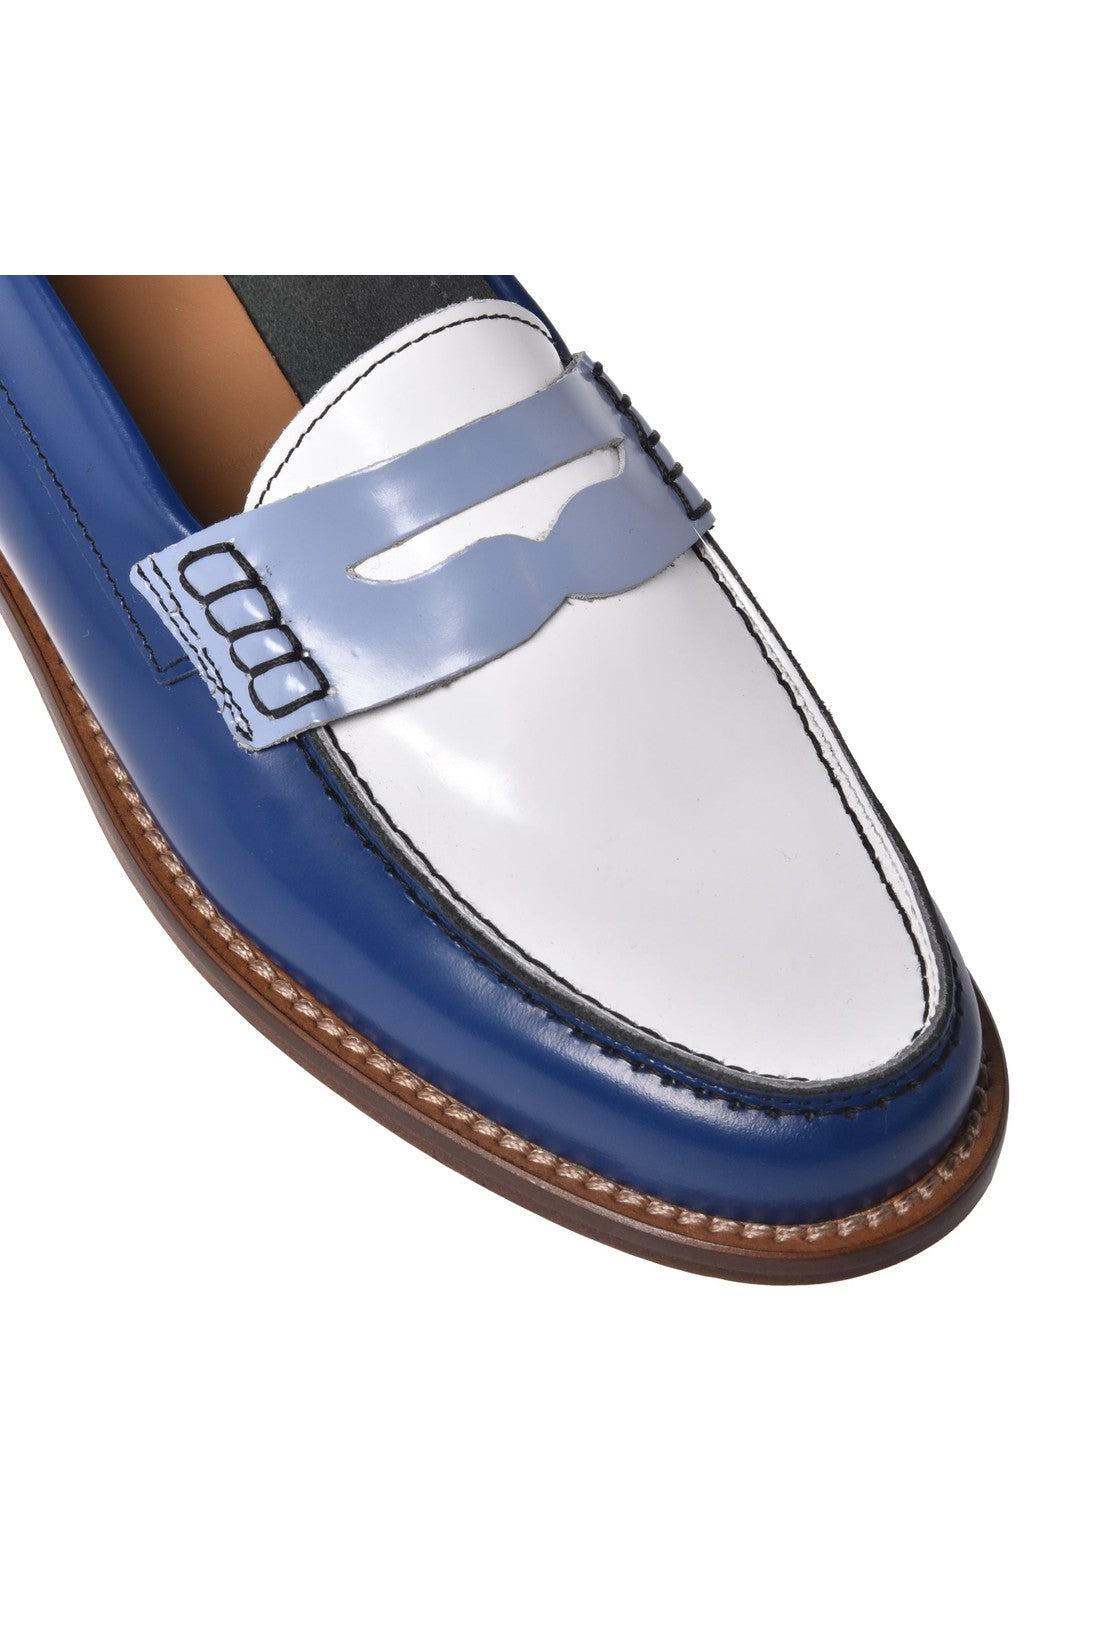 Loafer in blue and cream shiny calfskin